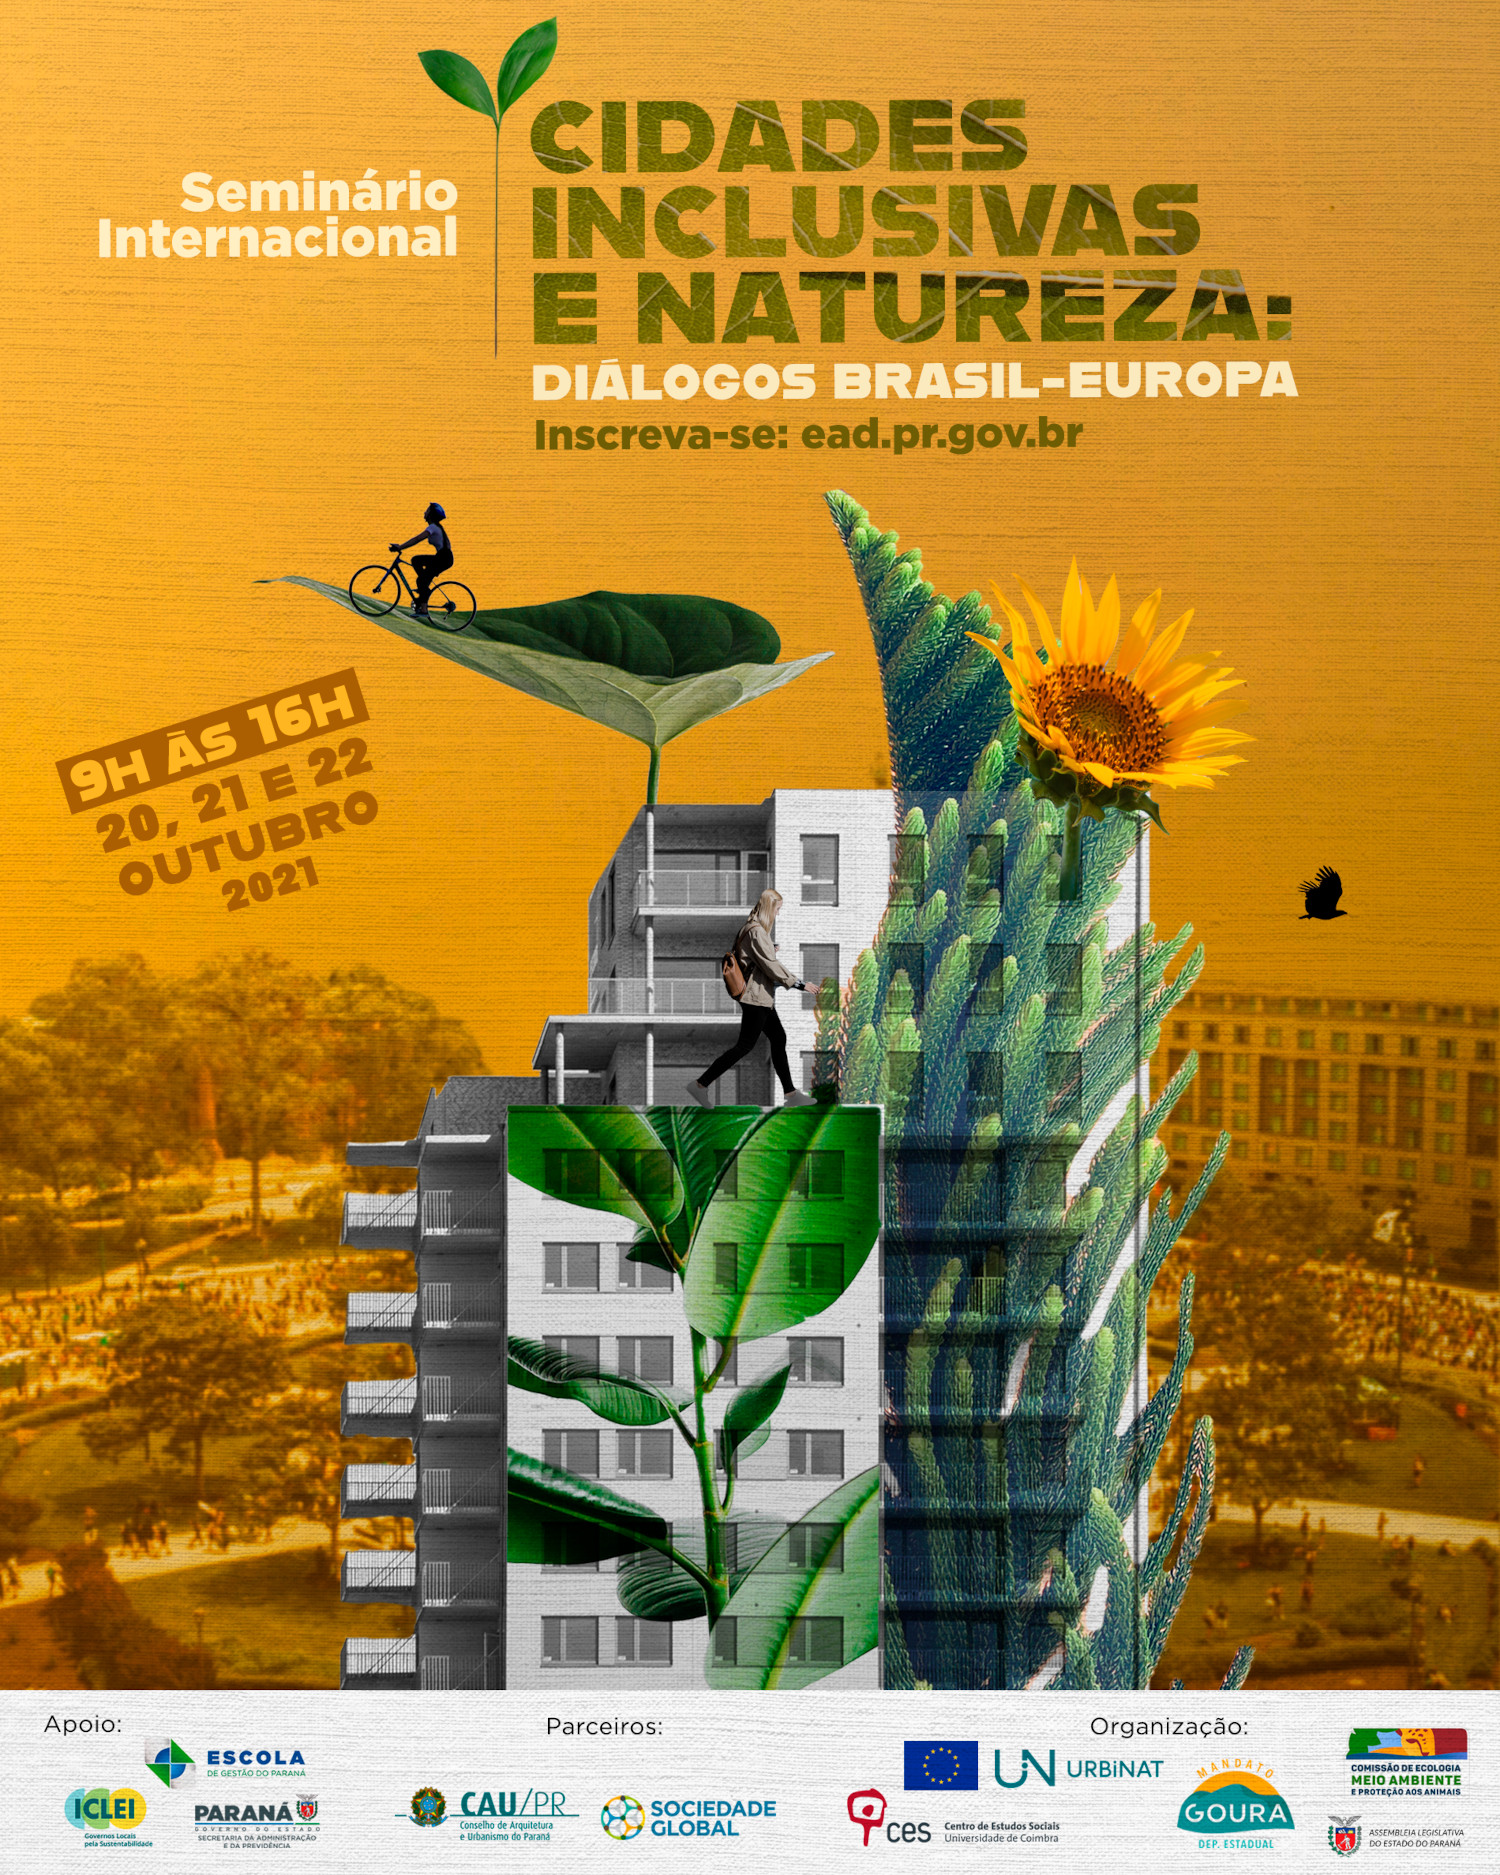 Inclusive Cities and Nature: a Brazil-Europe dialogue<span id="edit_35413"><script>$(function() { $('#edit_35413').load( "/myces/user/editobj.php?tipo=evento&id=35413" ); });</script></span>